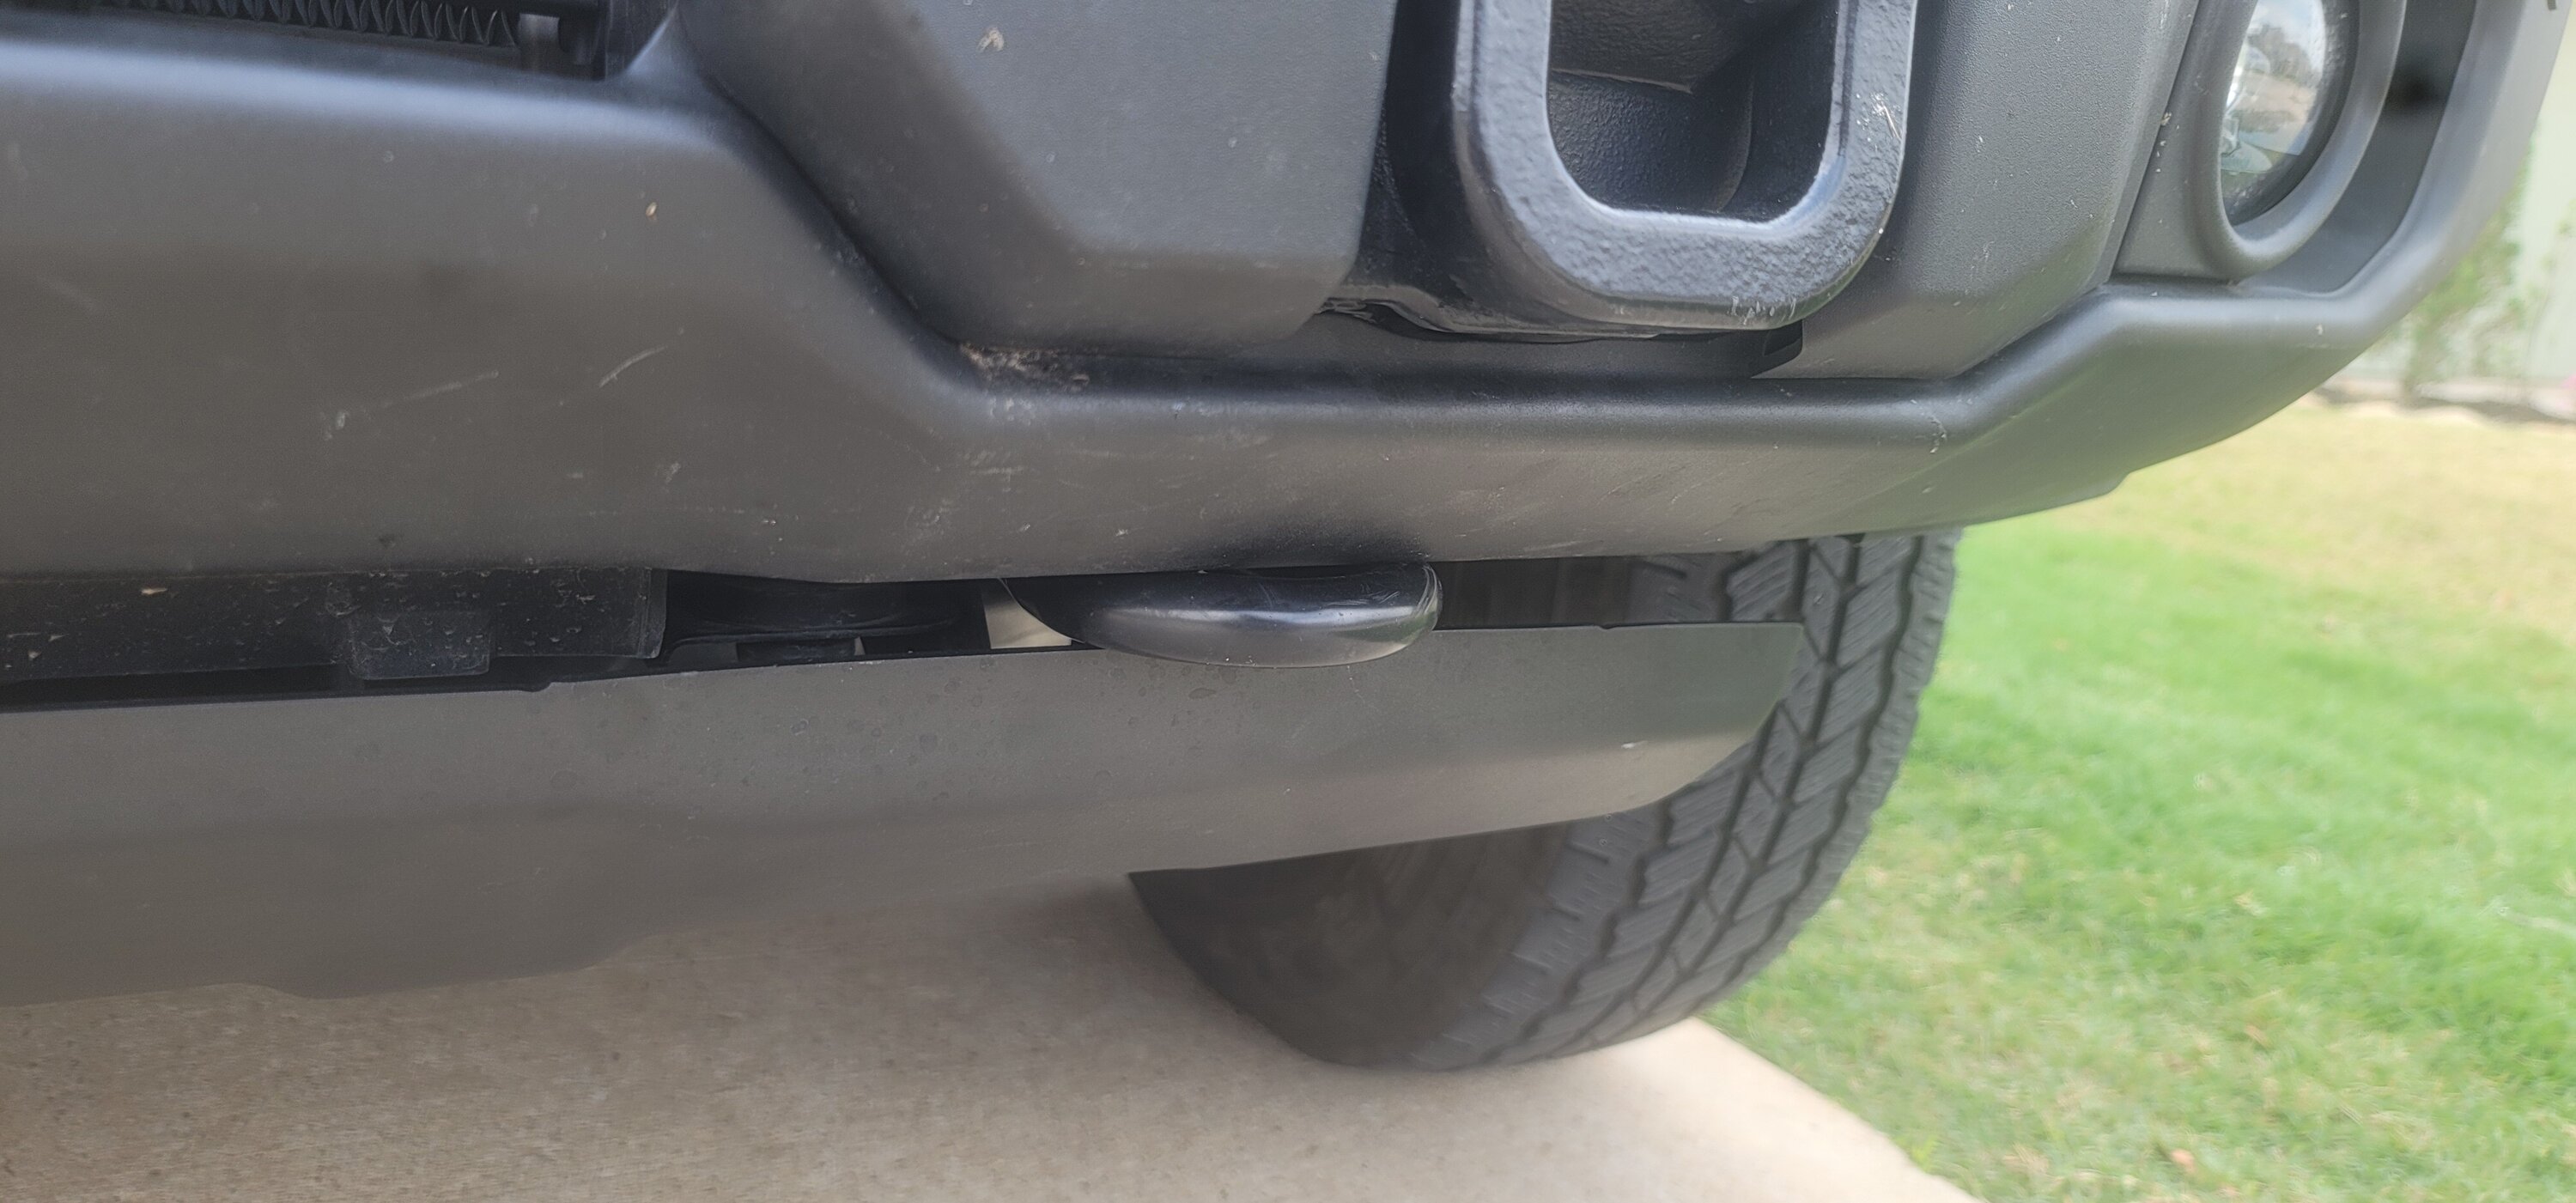 Ford Bronco Swapping plastic bumper for Capable Bumper? 20230505_123556